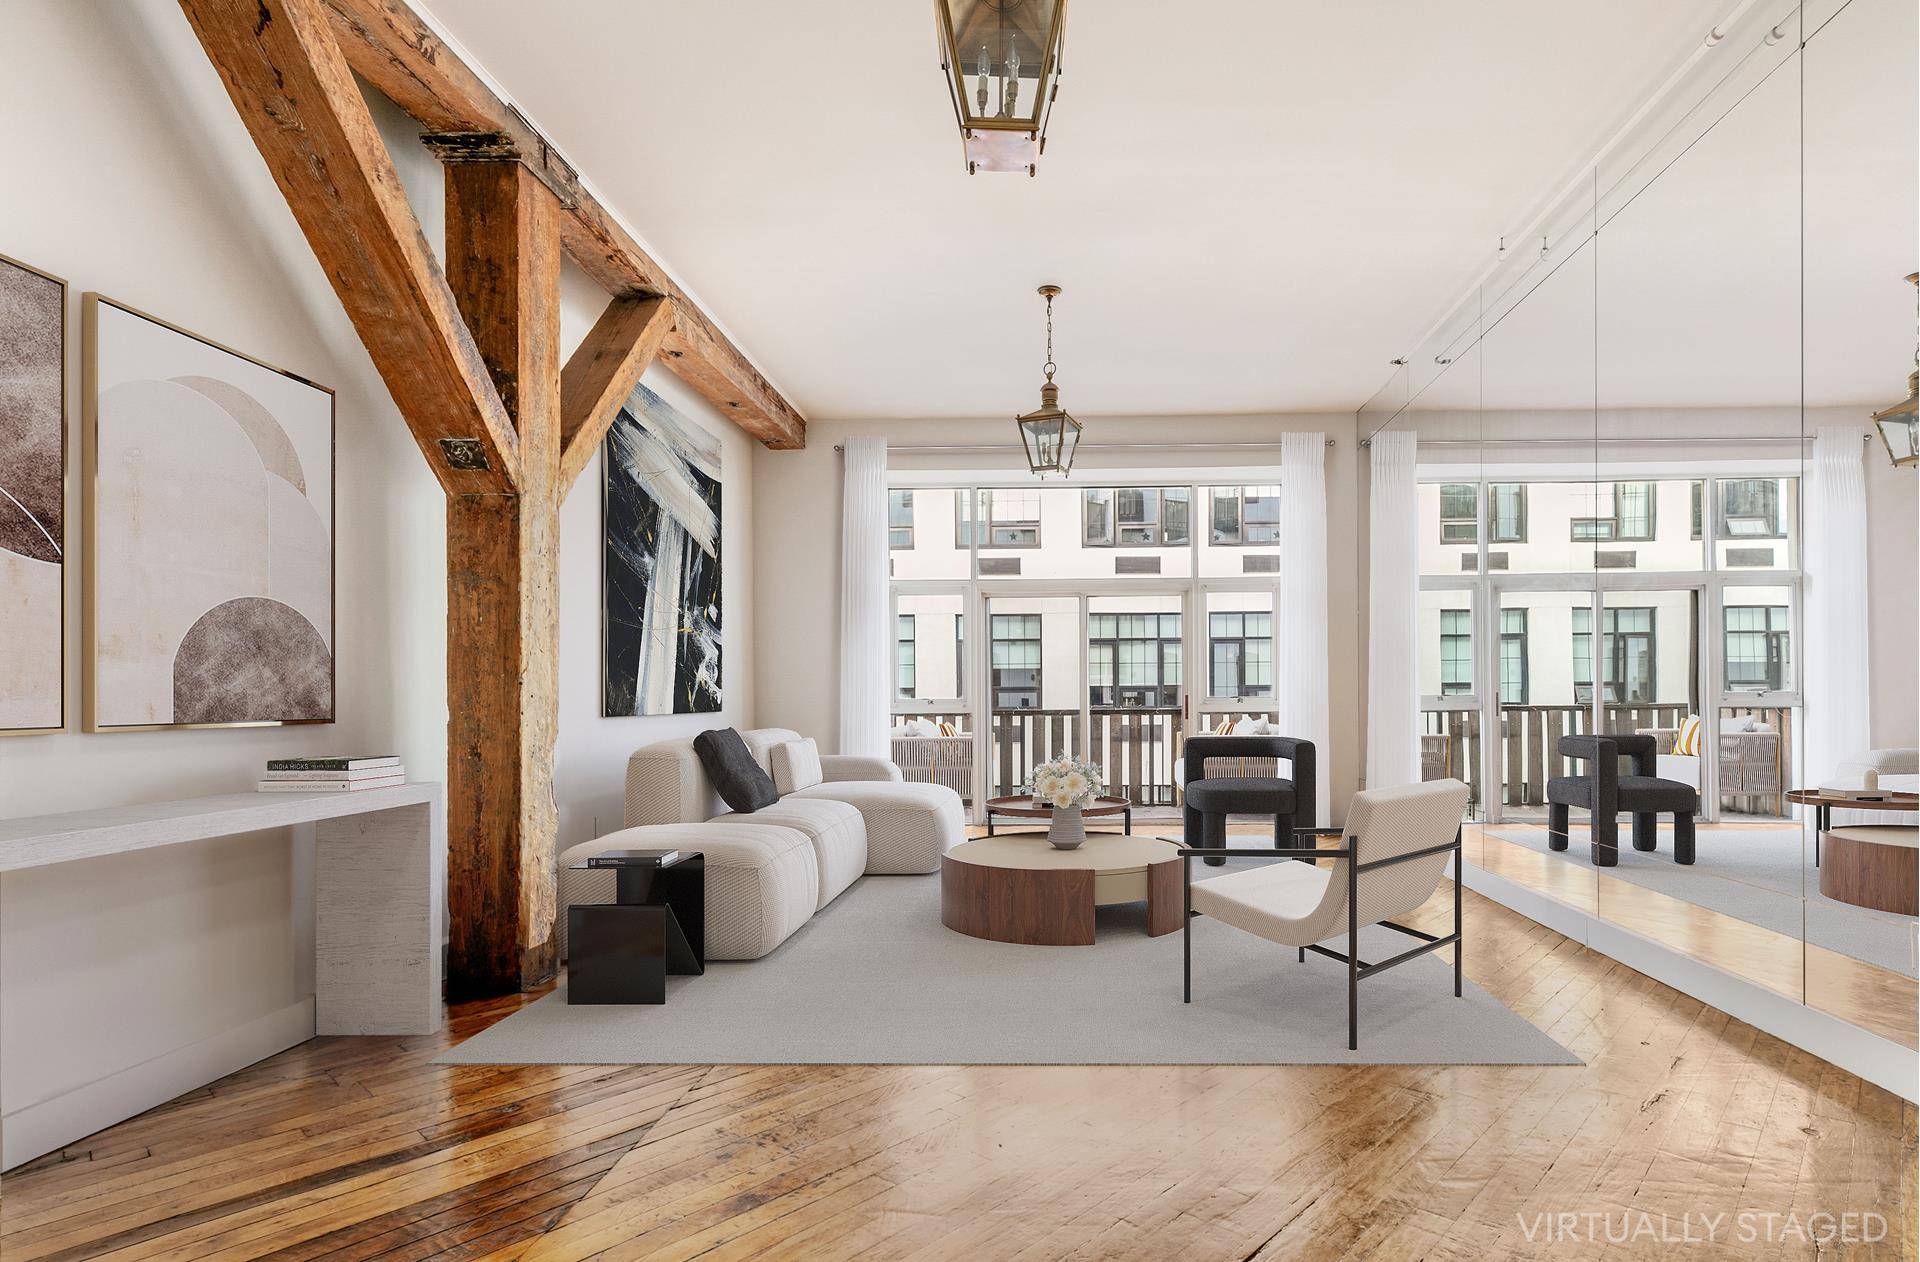 This remarkable and authentic loft residence, nestled within the highly sought after Mill Building, offers an expansive living space of approximately 1750 square feet, brimming with timeless charm.